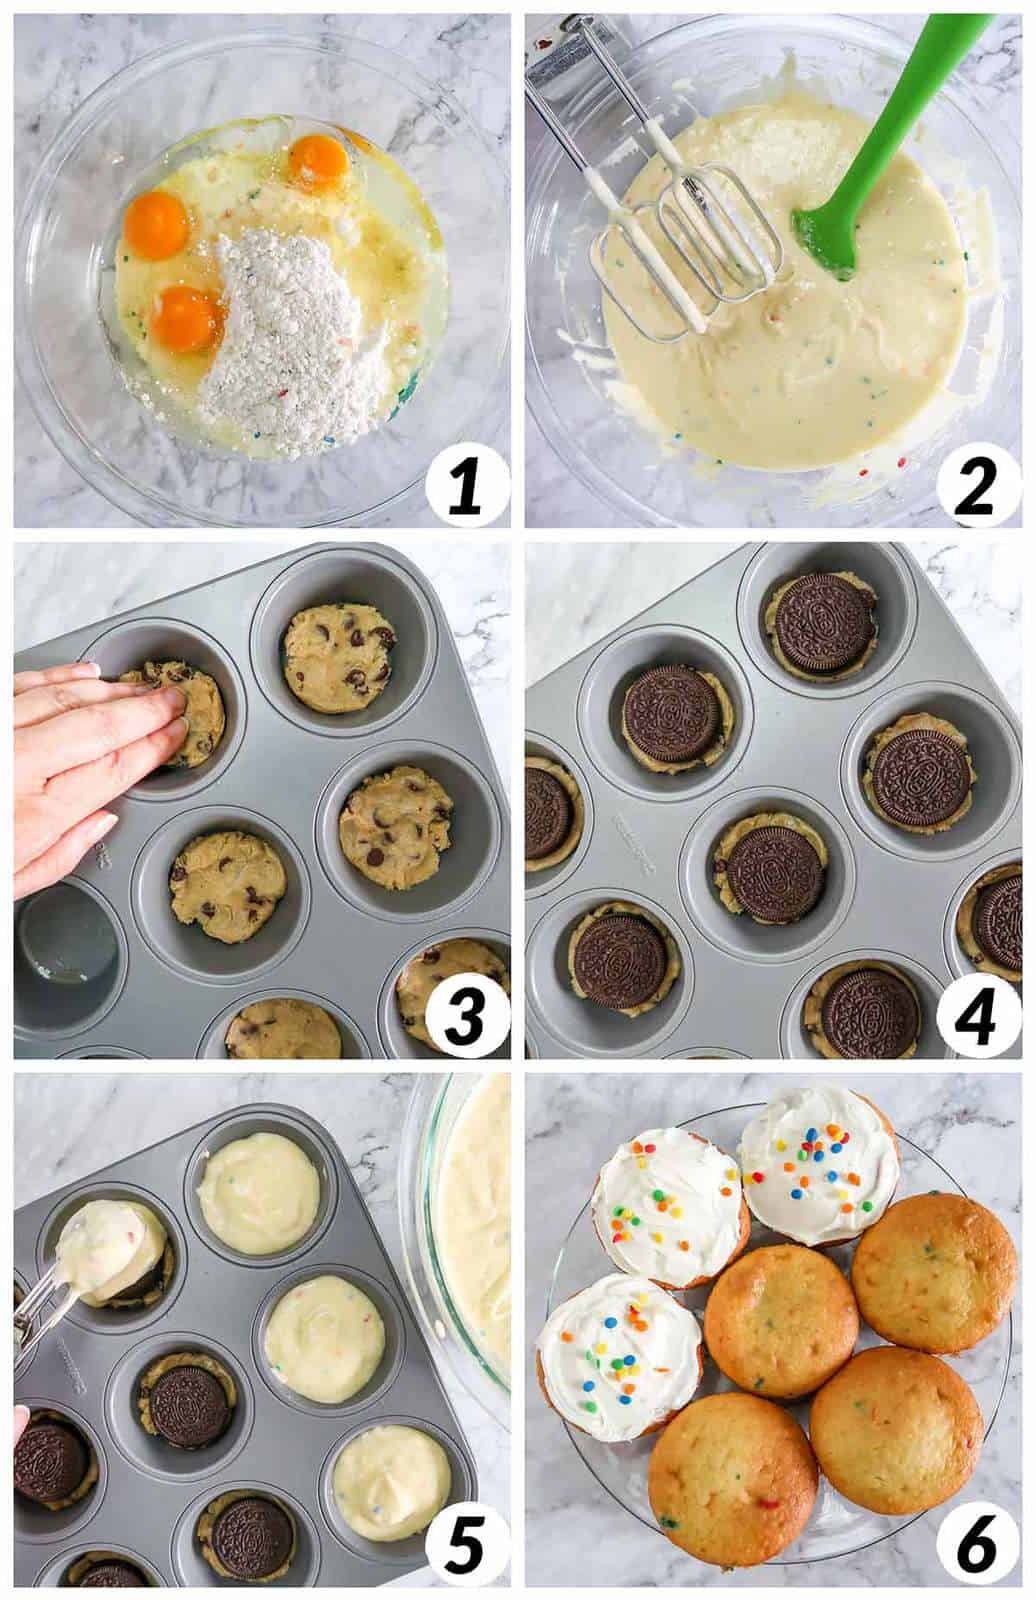 Six panel grid of process shots- mixing ingredients of cupcake mix, layering ingredients in cupcake sheet, baking, and frosting.